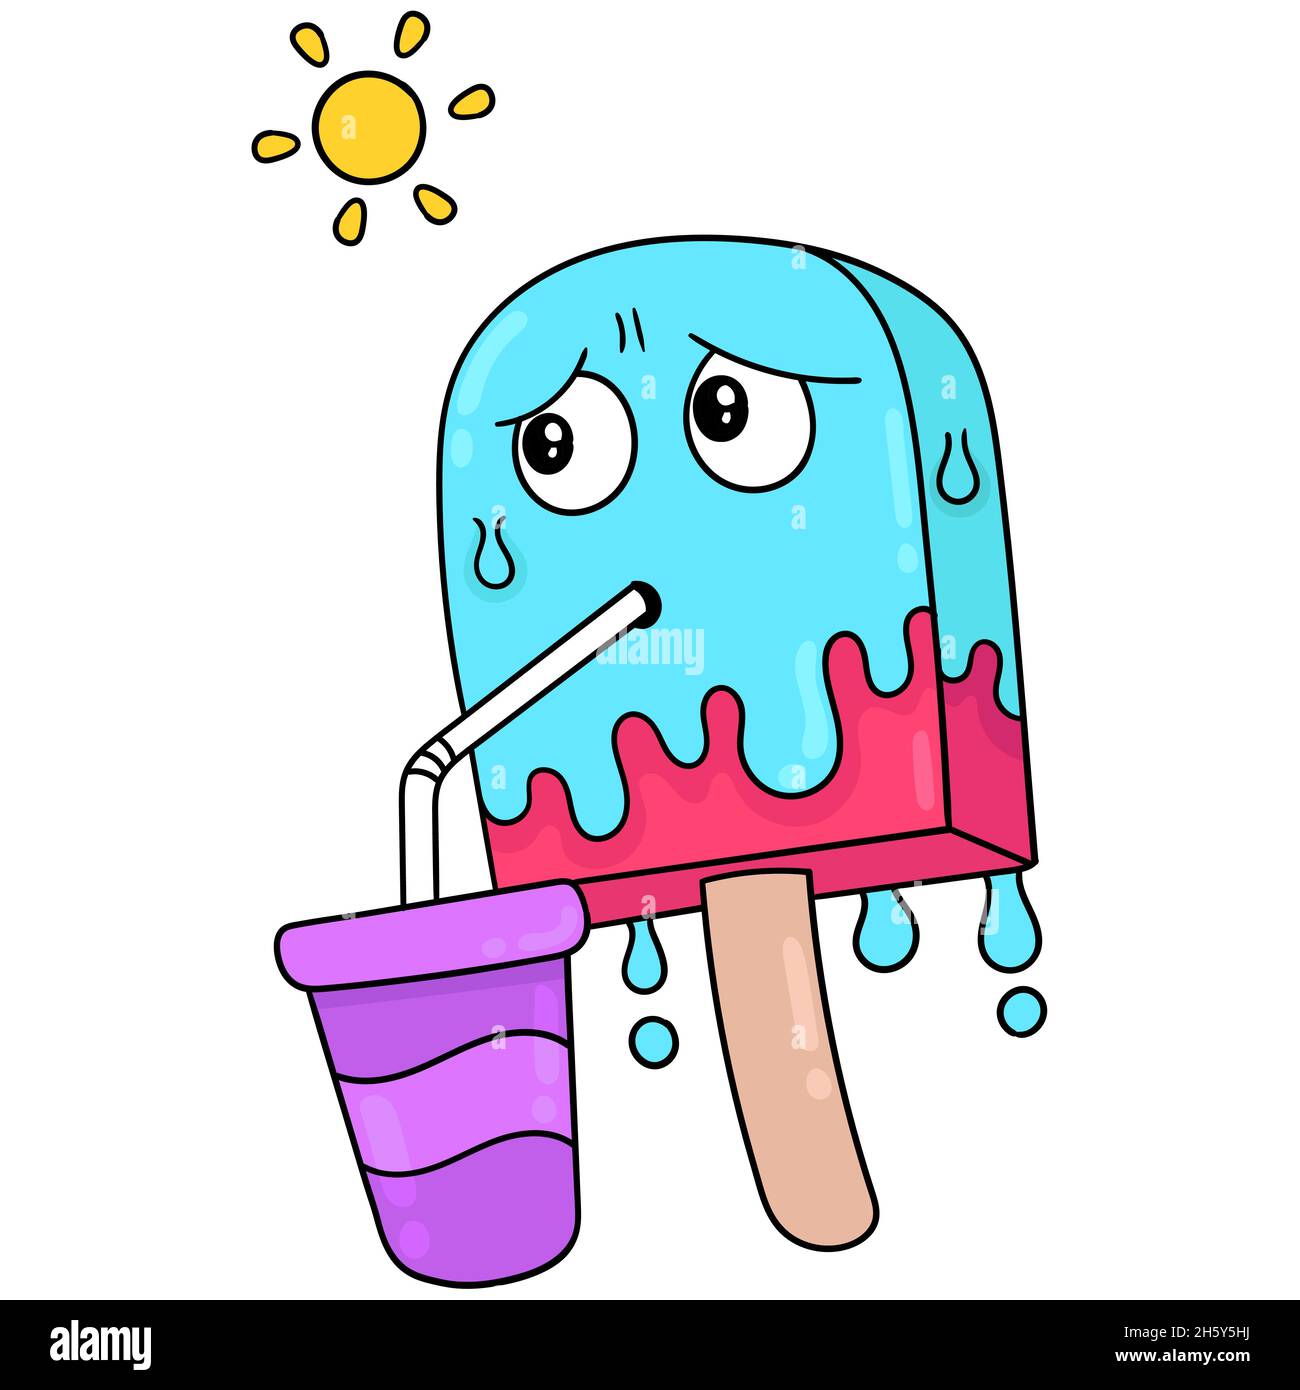 the ice cream is melting in the sun Stock Vector